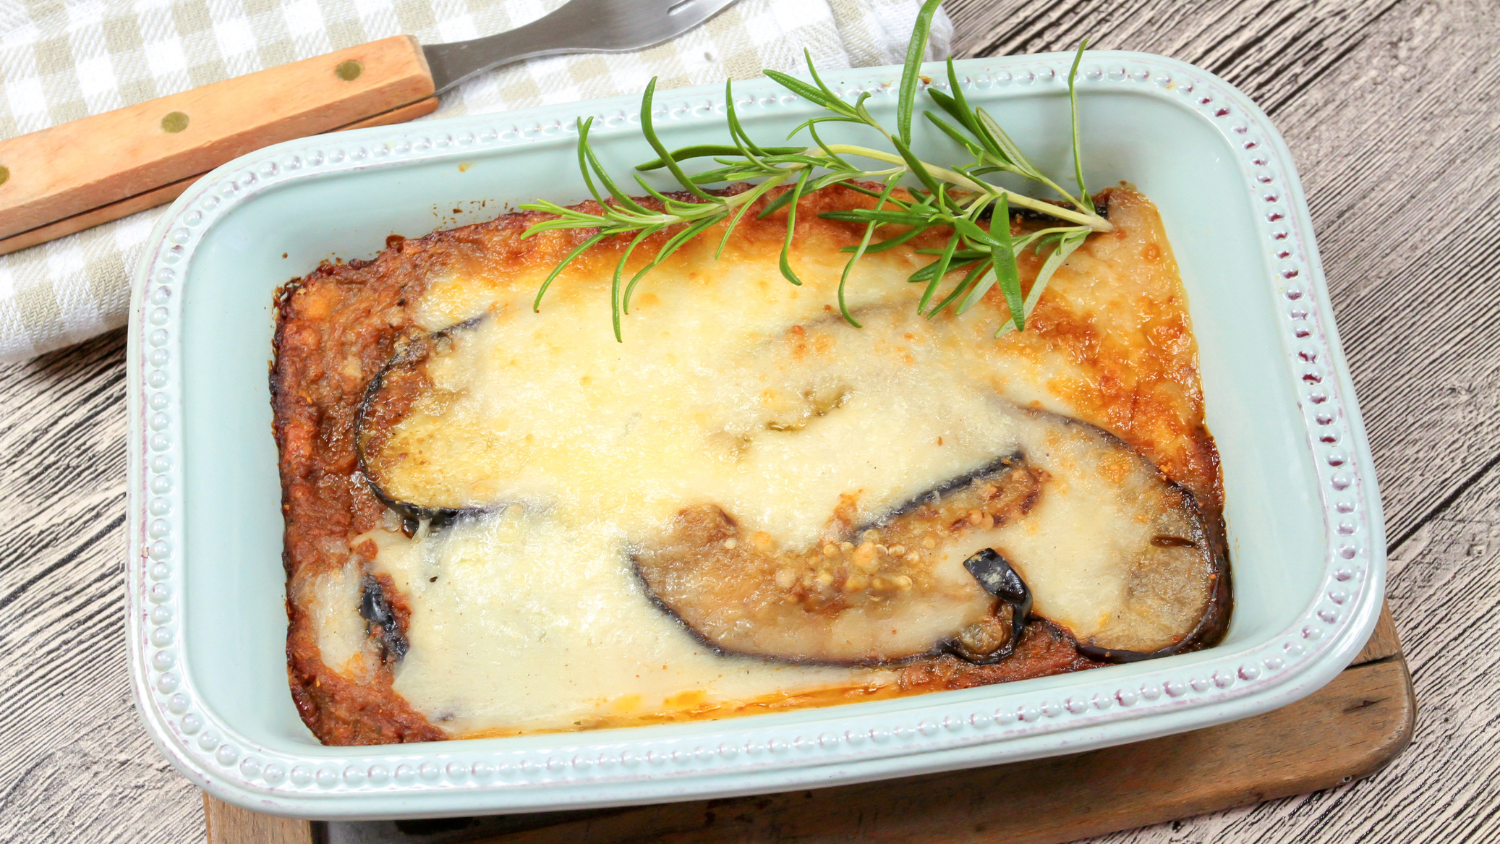 Image for Virtual Class – Budget Cooking: Cheesy Eggplant Casserole